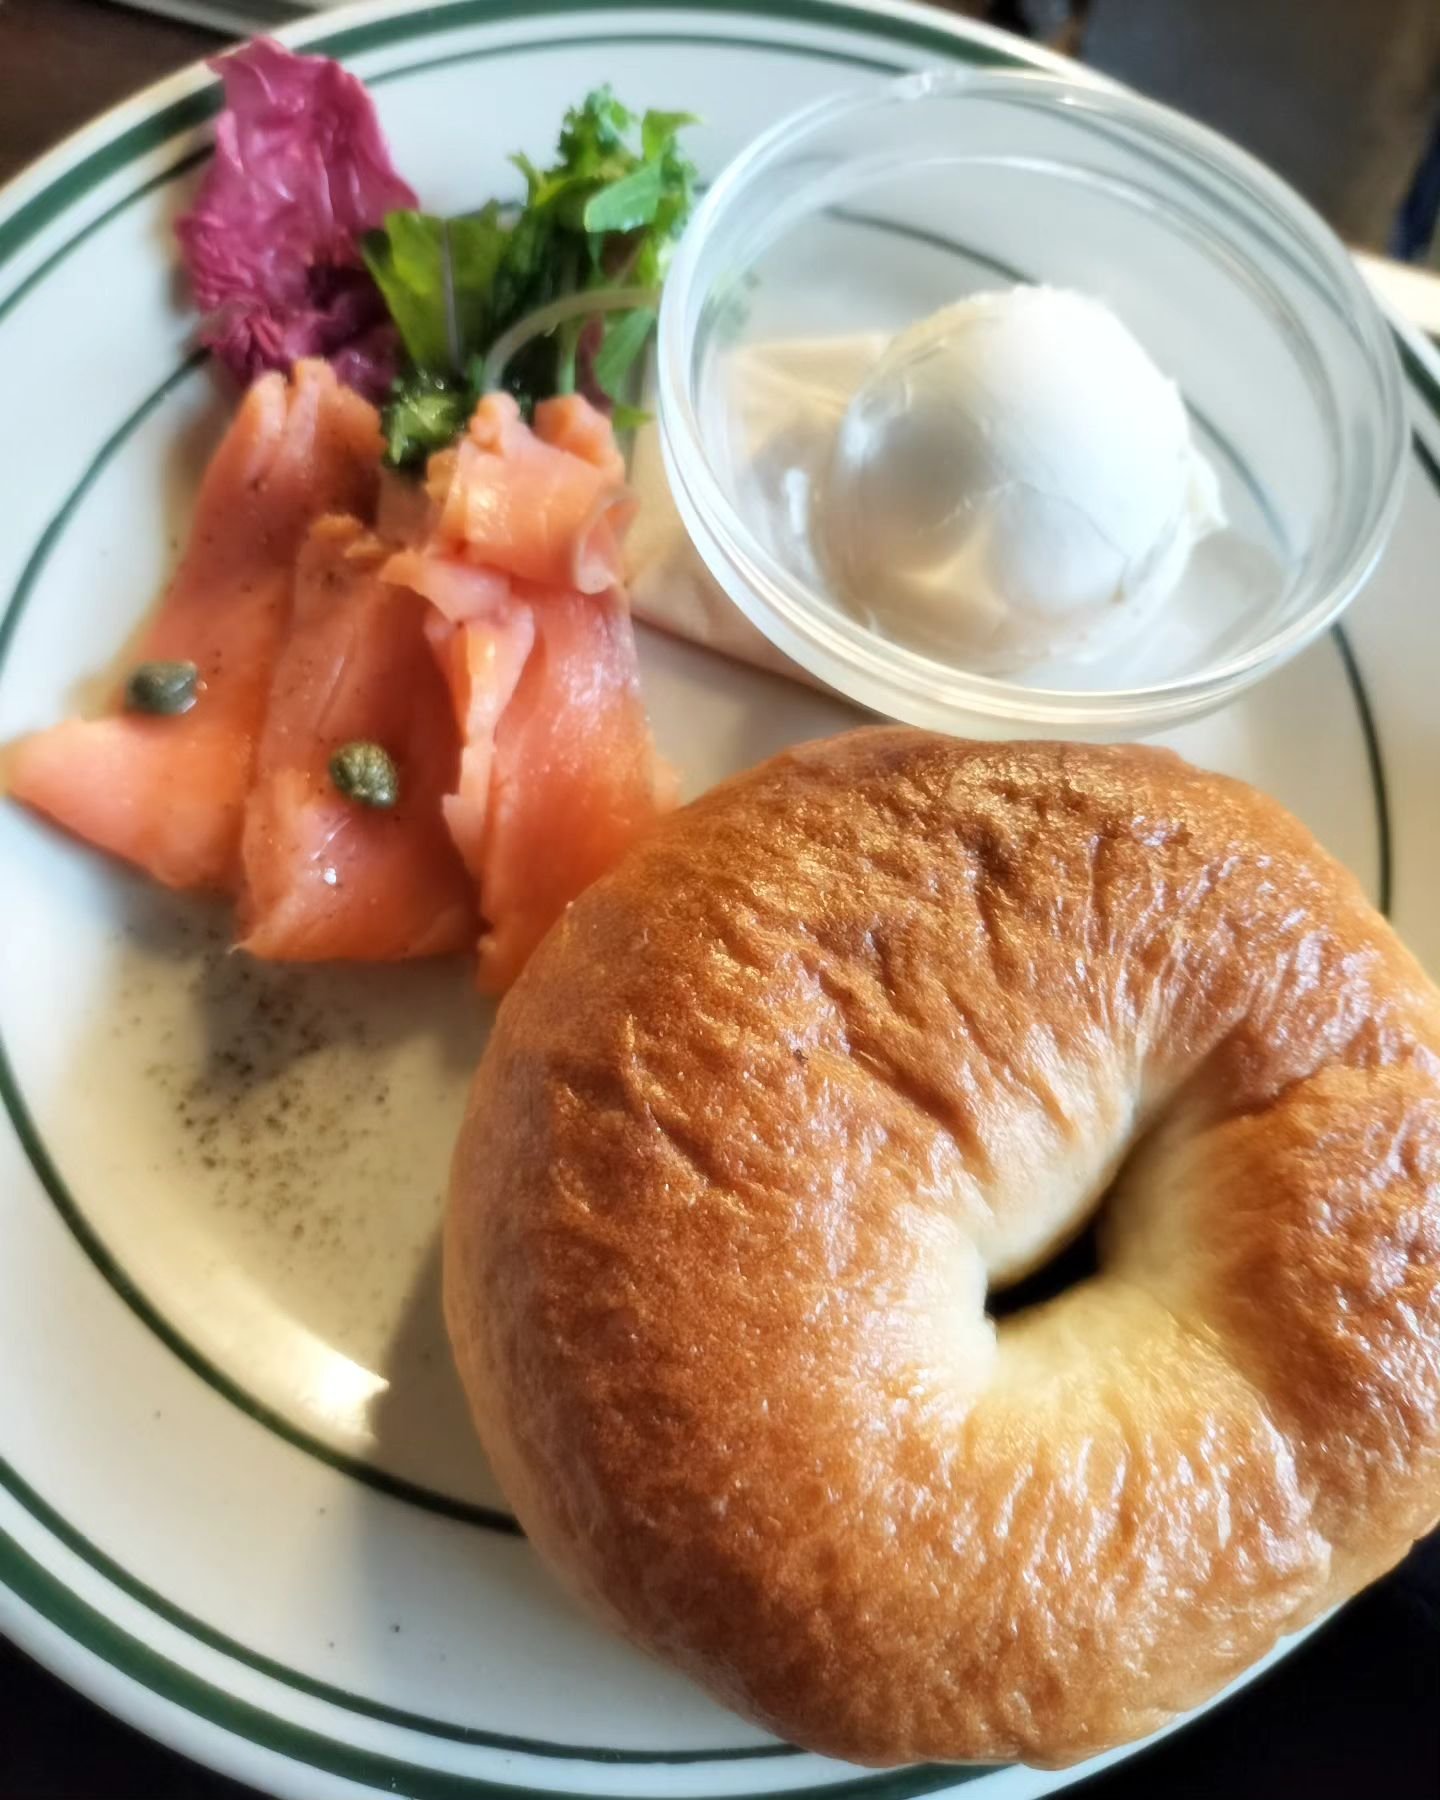 This is a recent popular custom menu.
Smoked salmon and cream cheese on a bagel!
Please try it 😋

#asakusa #sukerokudiner #suke6diner #morning  #breakfast #brunch #brunchtime #lunch #omlette #diner #cafe #pastry #coffee #gourmet 
#tokyo #tokyogourme